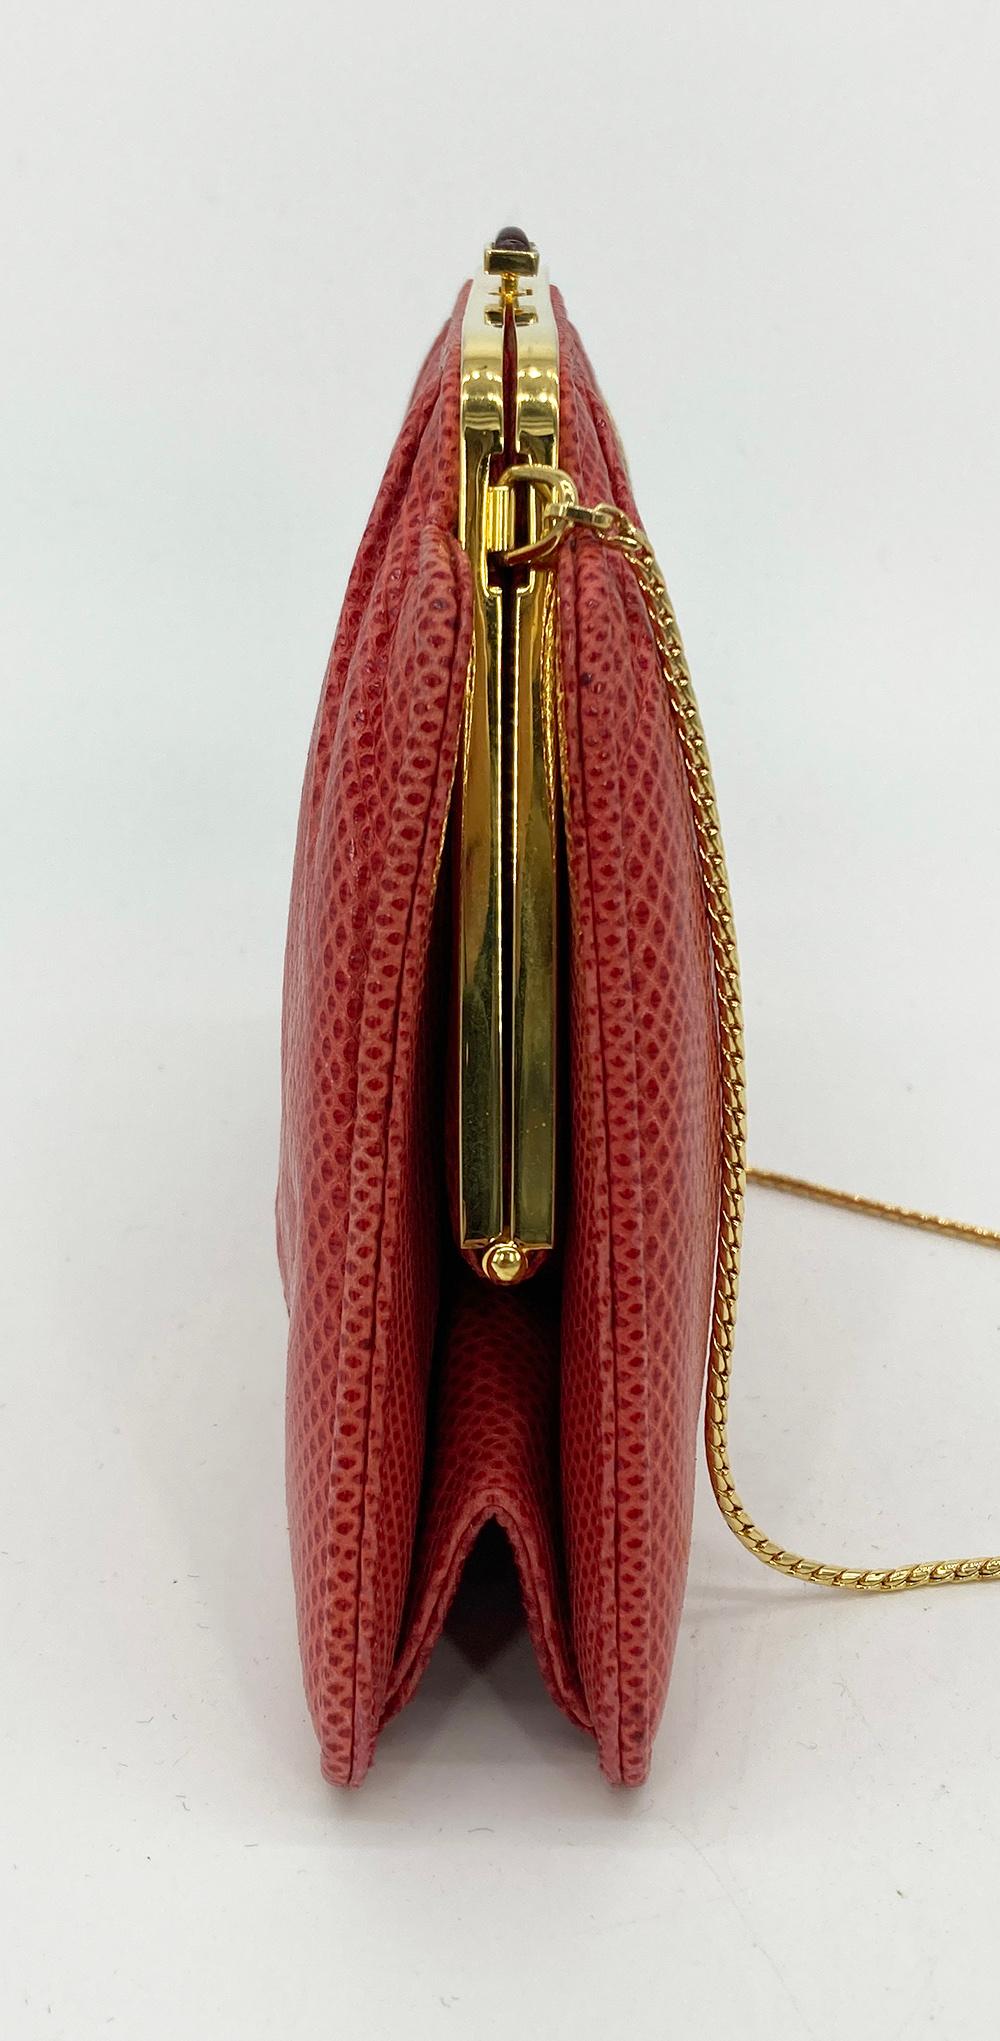 Judith Leiber Red Lizard Small Shoulder Bag in very good vintage condition. Red lizard leather trimmed with gold hardware and gold chain shoulder strap. Top button closure opens to a red nylon interior with one slit side pocket. Overall very good